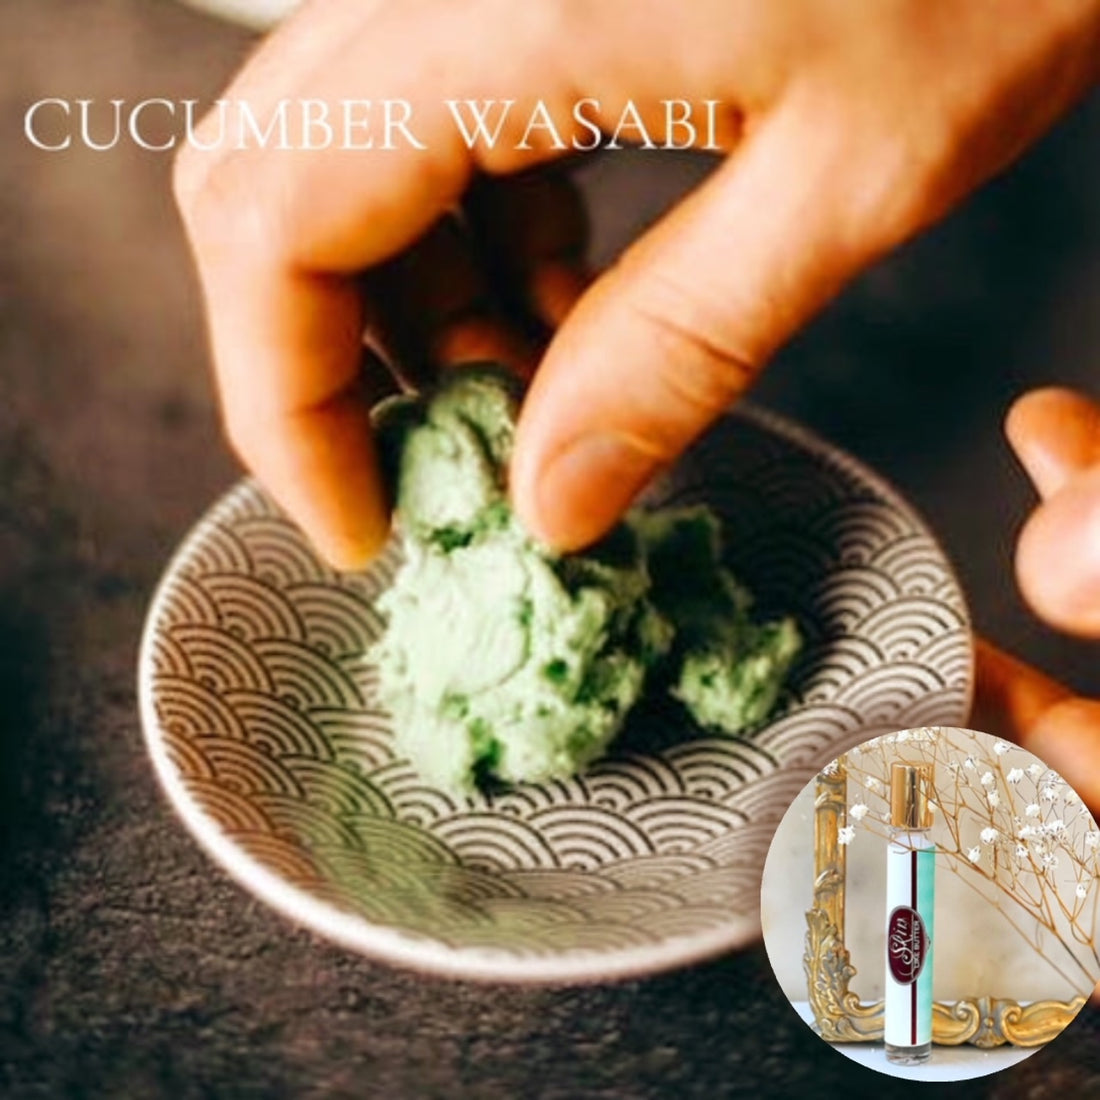 CUCUMBER WASABI Roll on Perfume Deal!  - Buy 1 get 1 50% off-use coupon code 2PLEASE